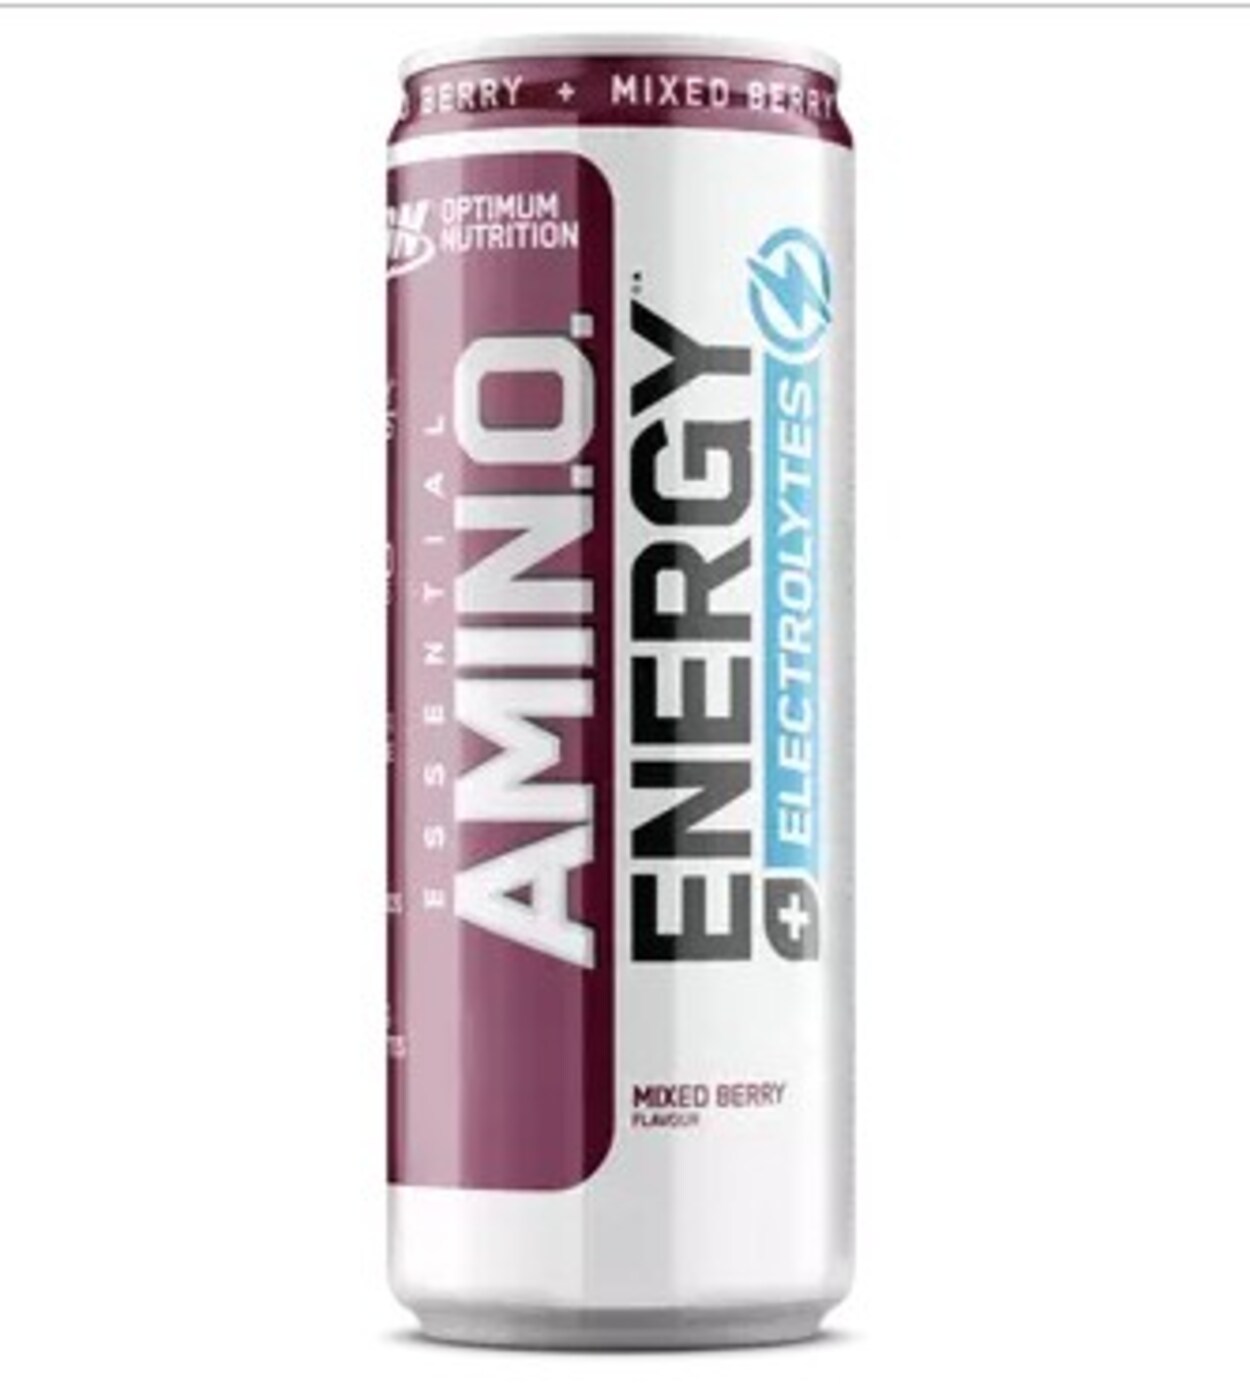 Amino Energy Drink: Revealing the Real Deal on Its Health Impact